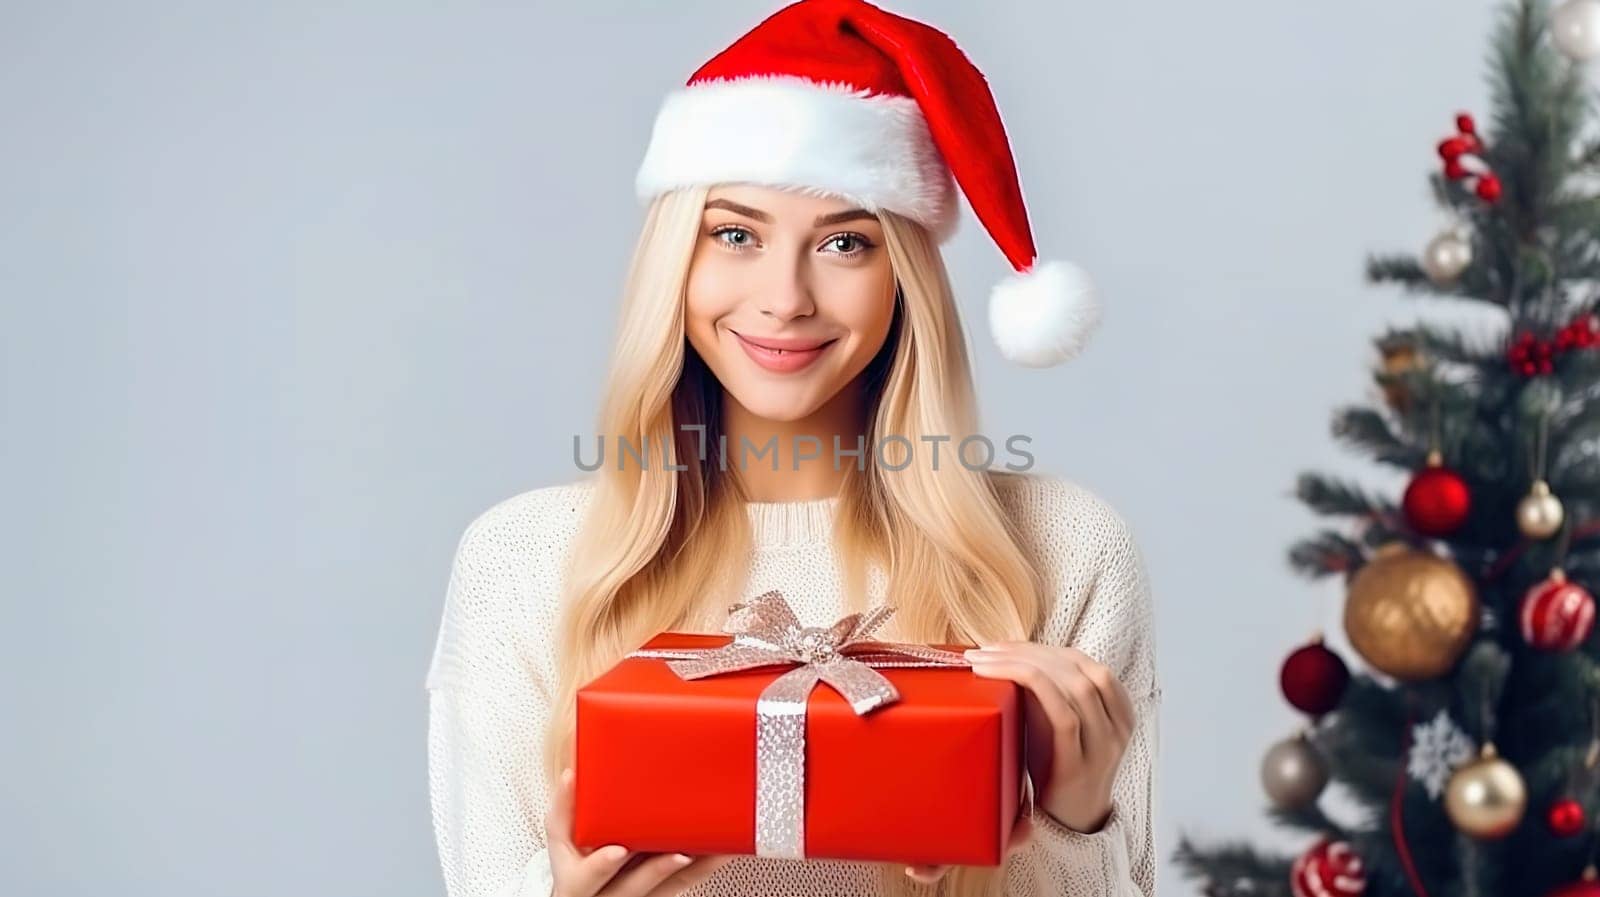 A beautiful girl in a red Christmas hat gives a gift